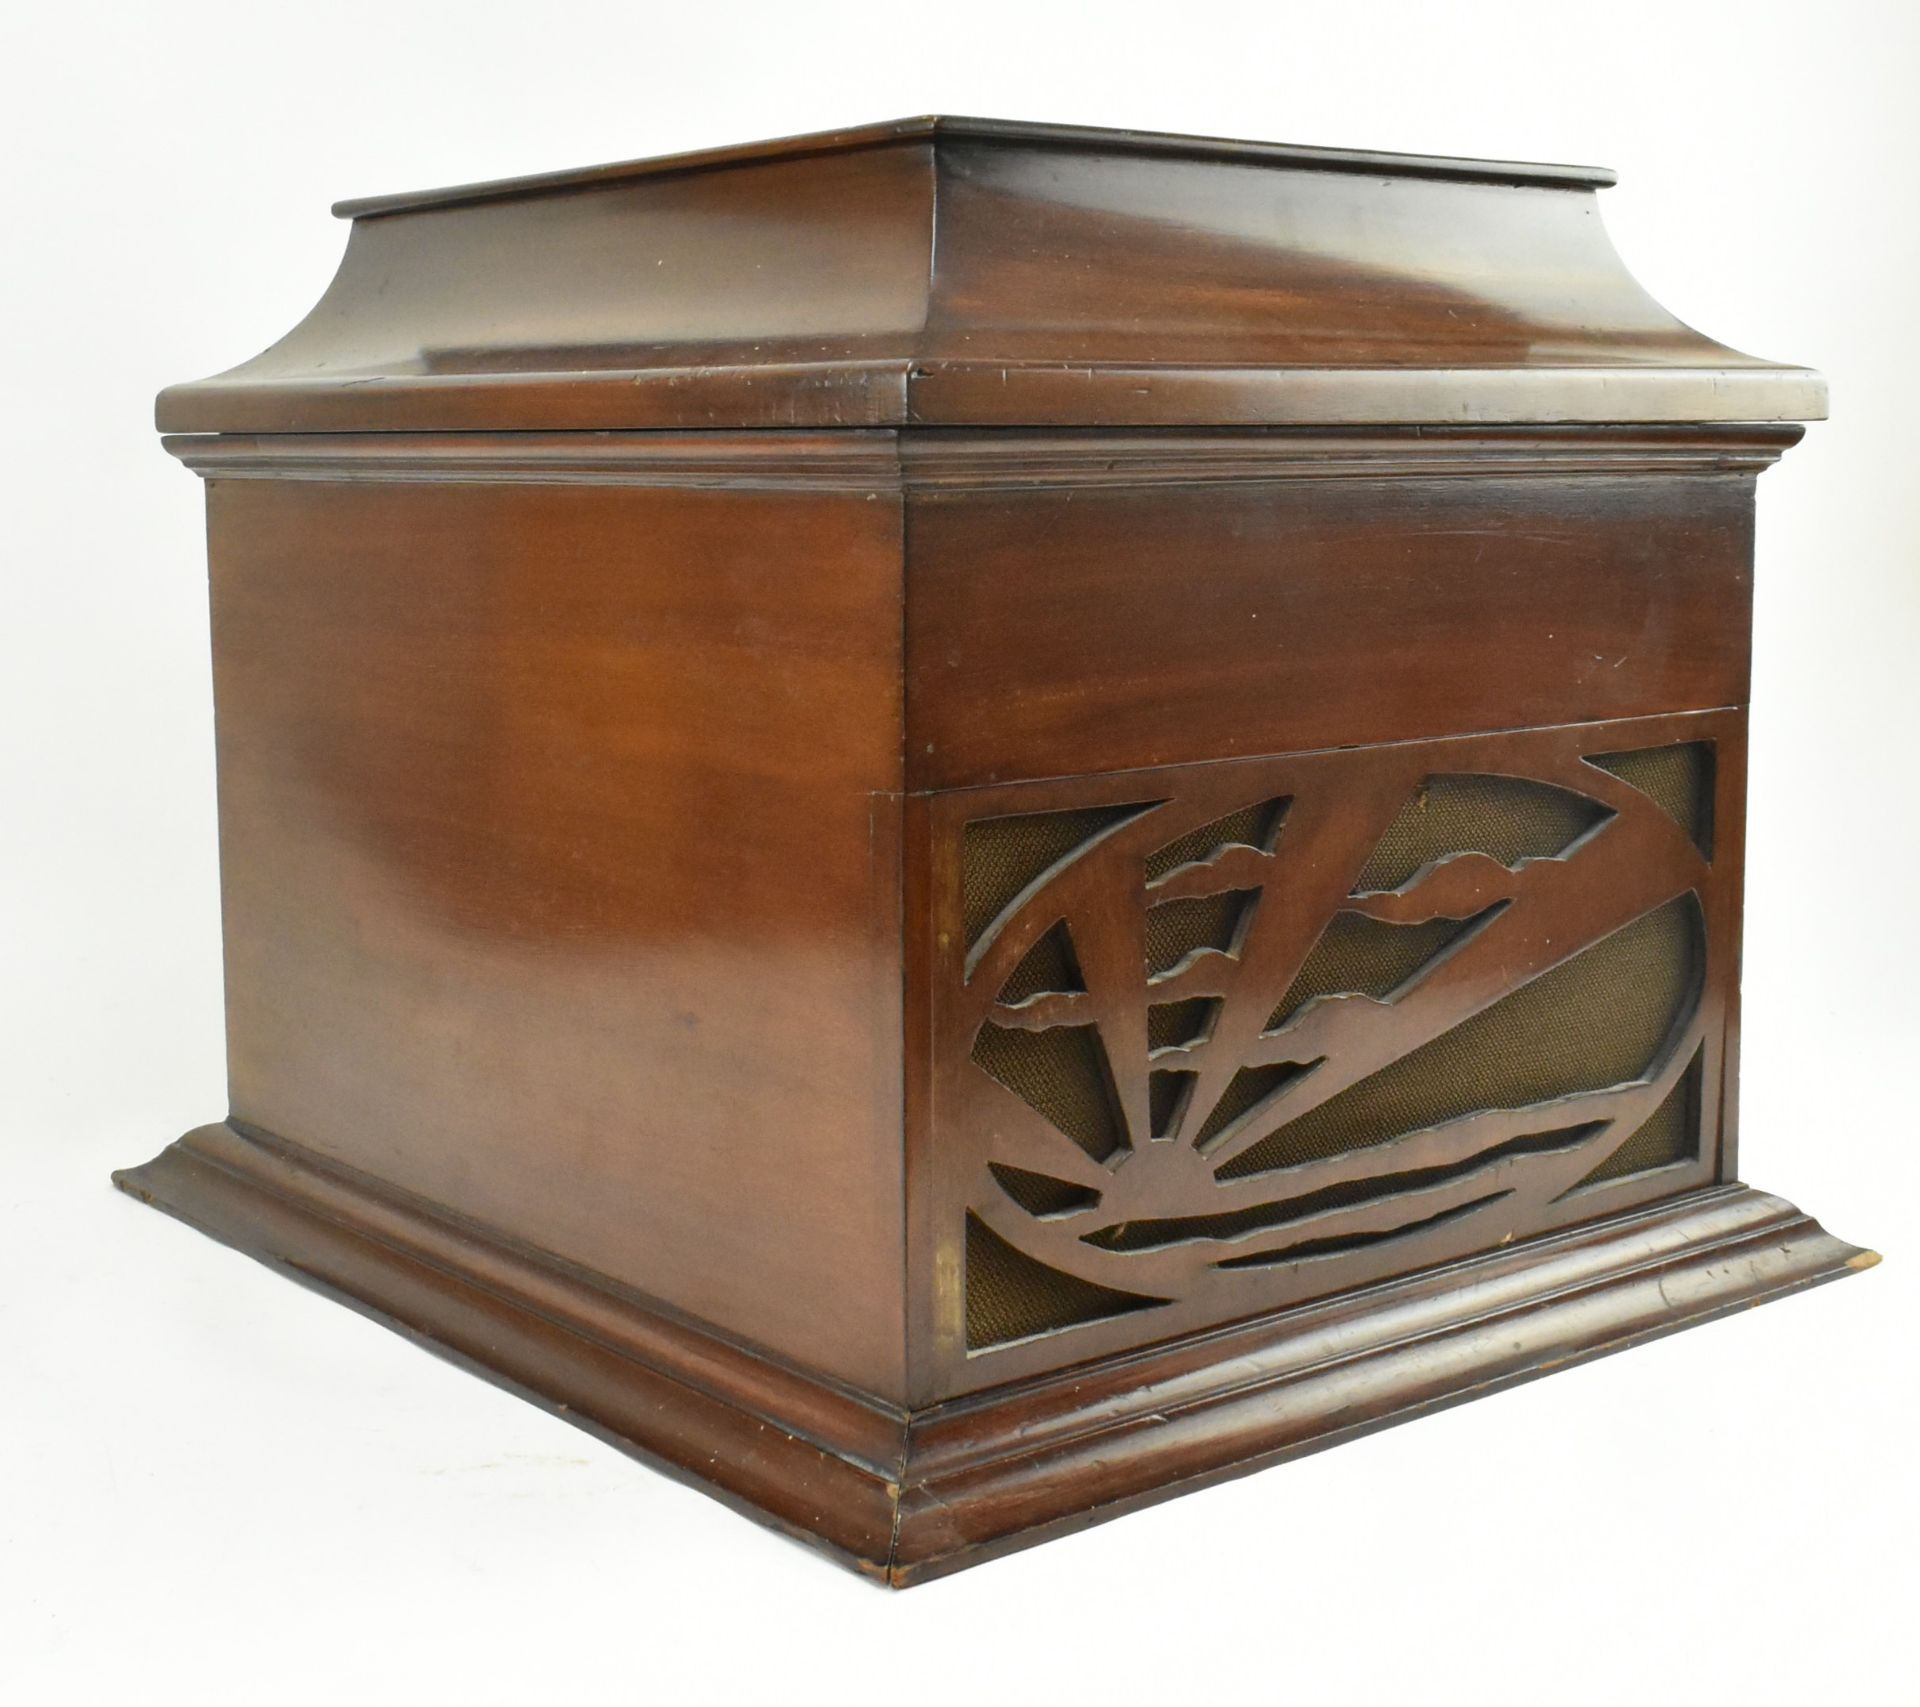 EARLY 20TH CENTURY ART DECO STYLE GRAMOPHONE - Image 5 of 6